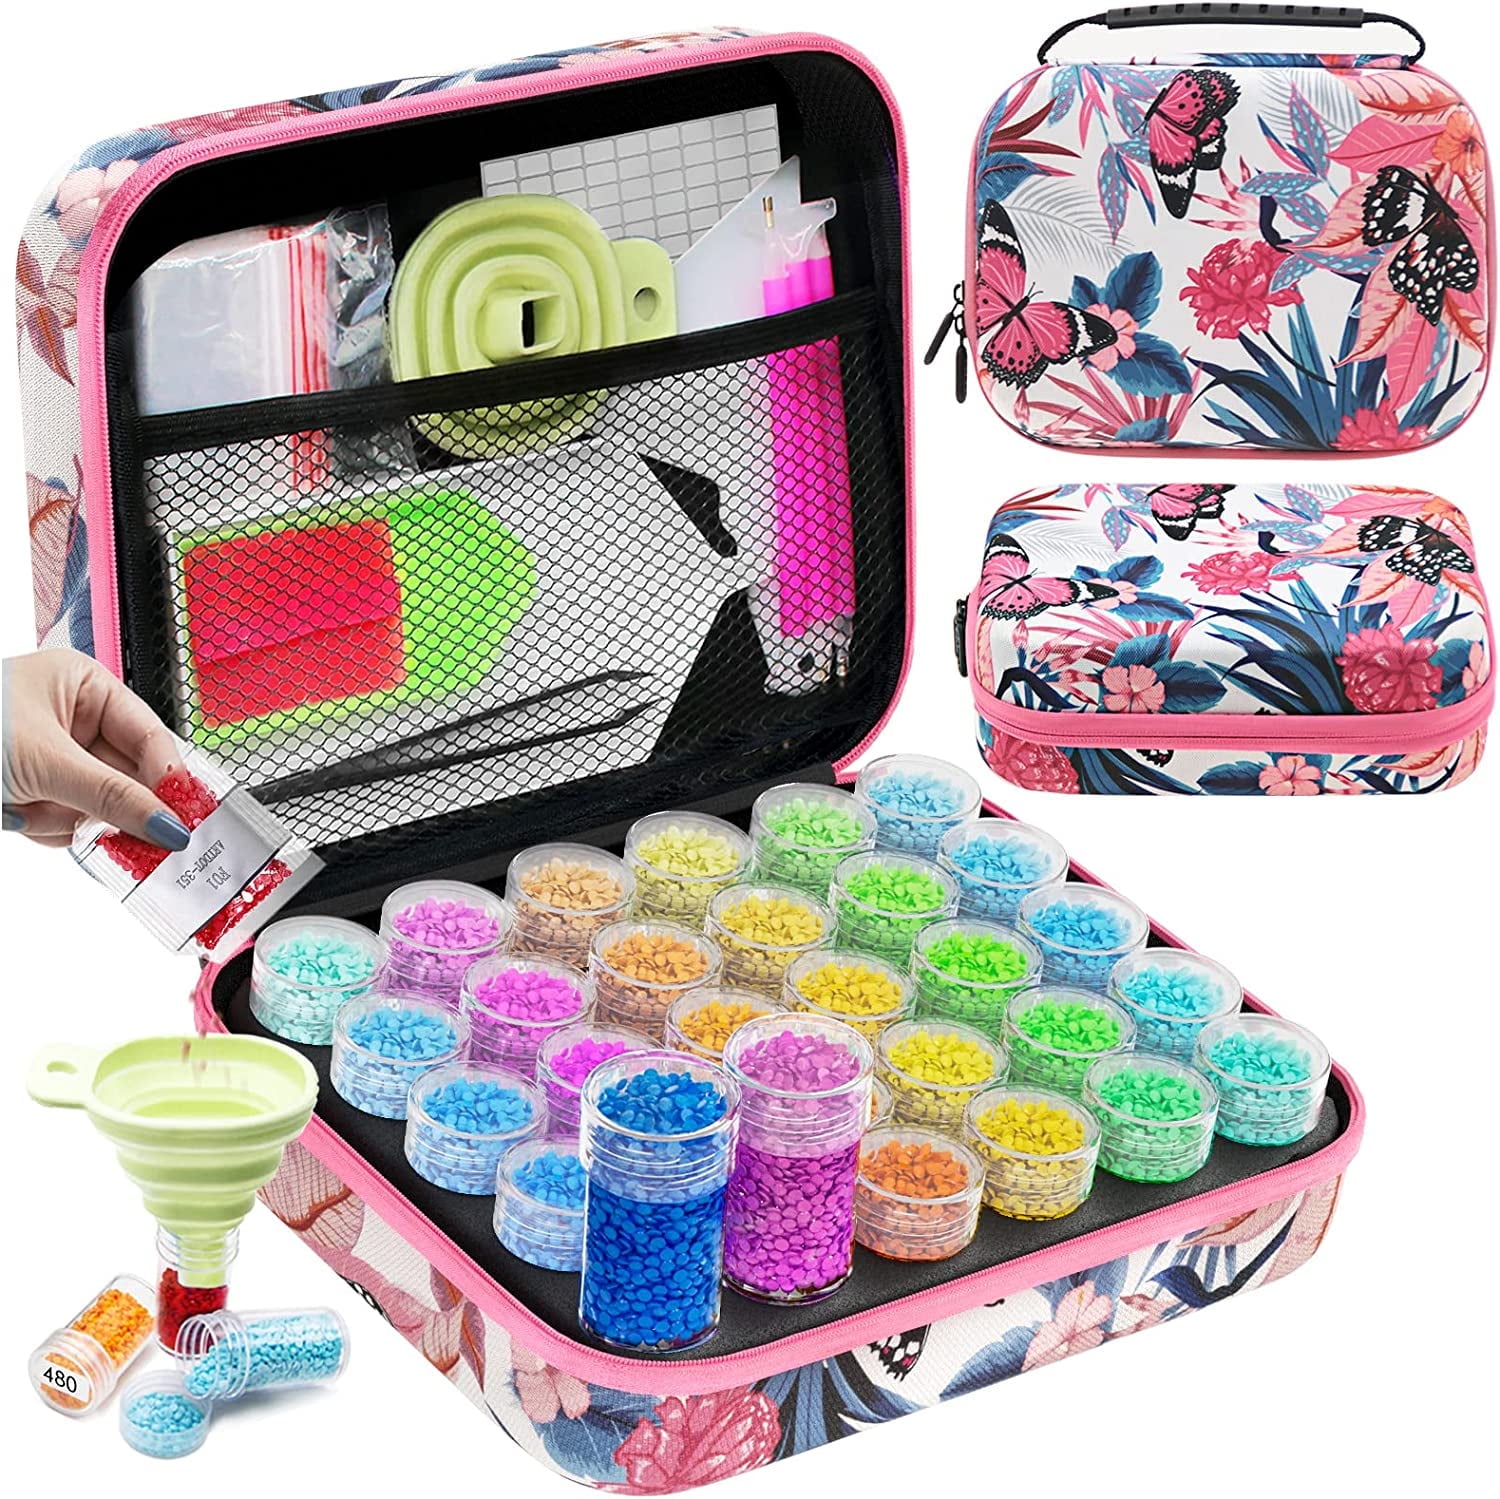  5d Diamond Painting Tools Kits 96pcs DIY Diamond Painting  Accessories with Rhinestone Storage Containers Diamond Embroidery Box Bead  Roller for Diamond Art Painting Supplies : Arts, Crafts & Sewing